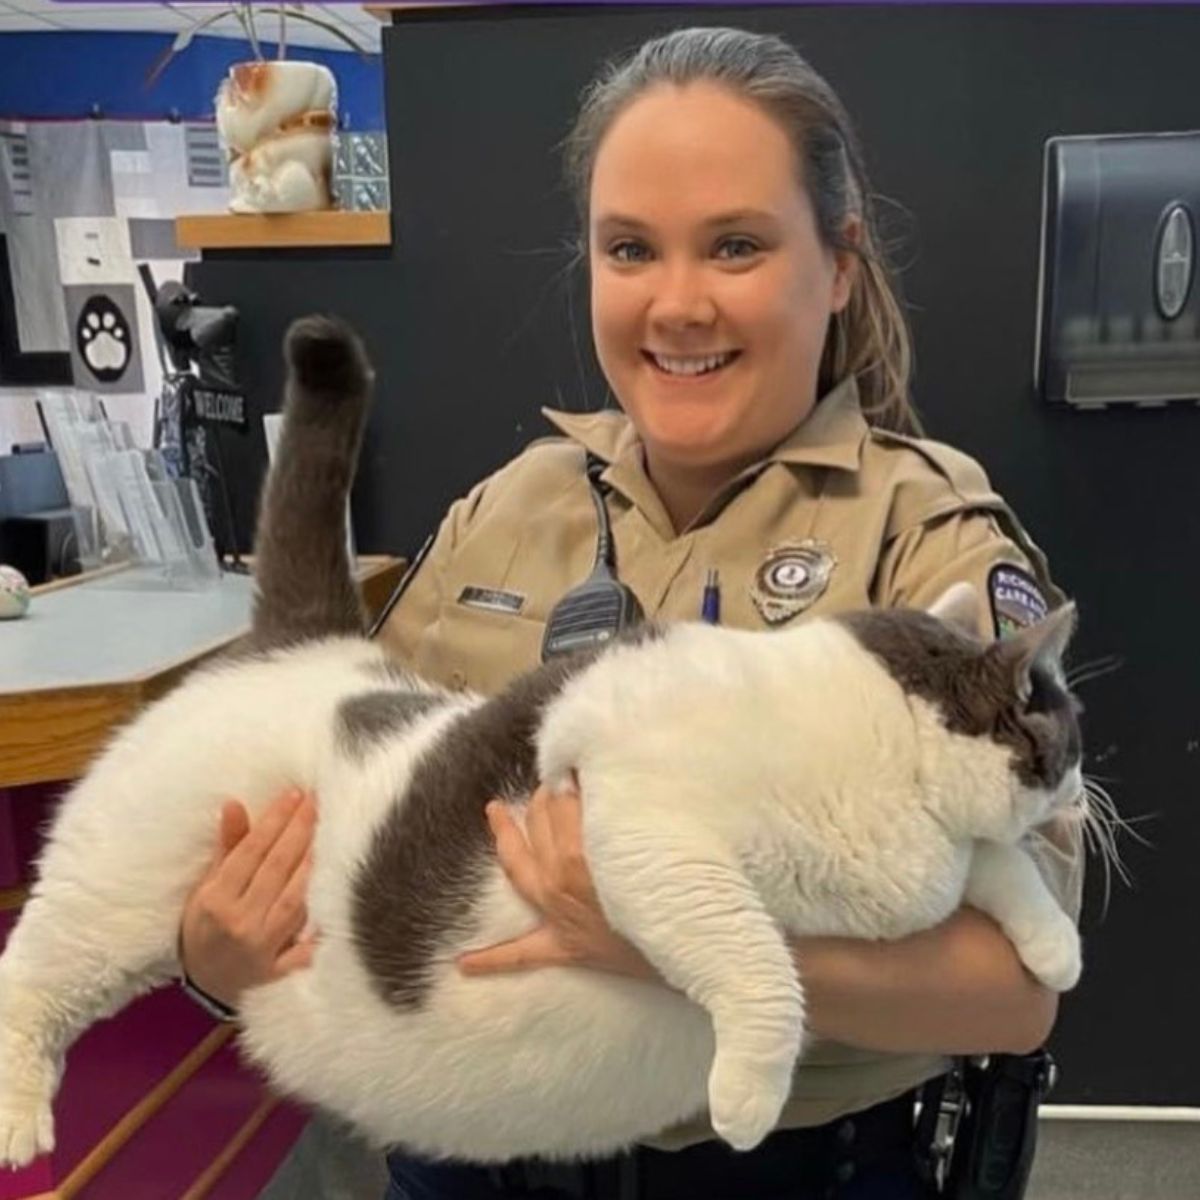 officer and fat cat